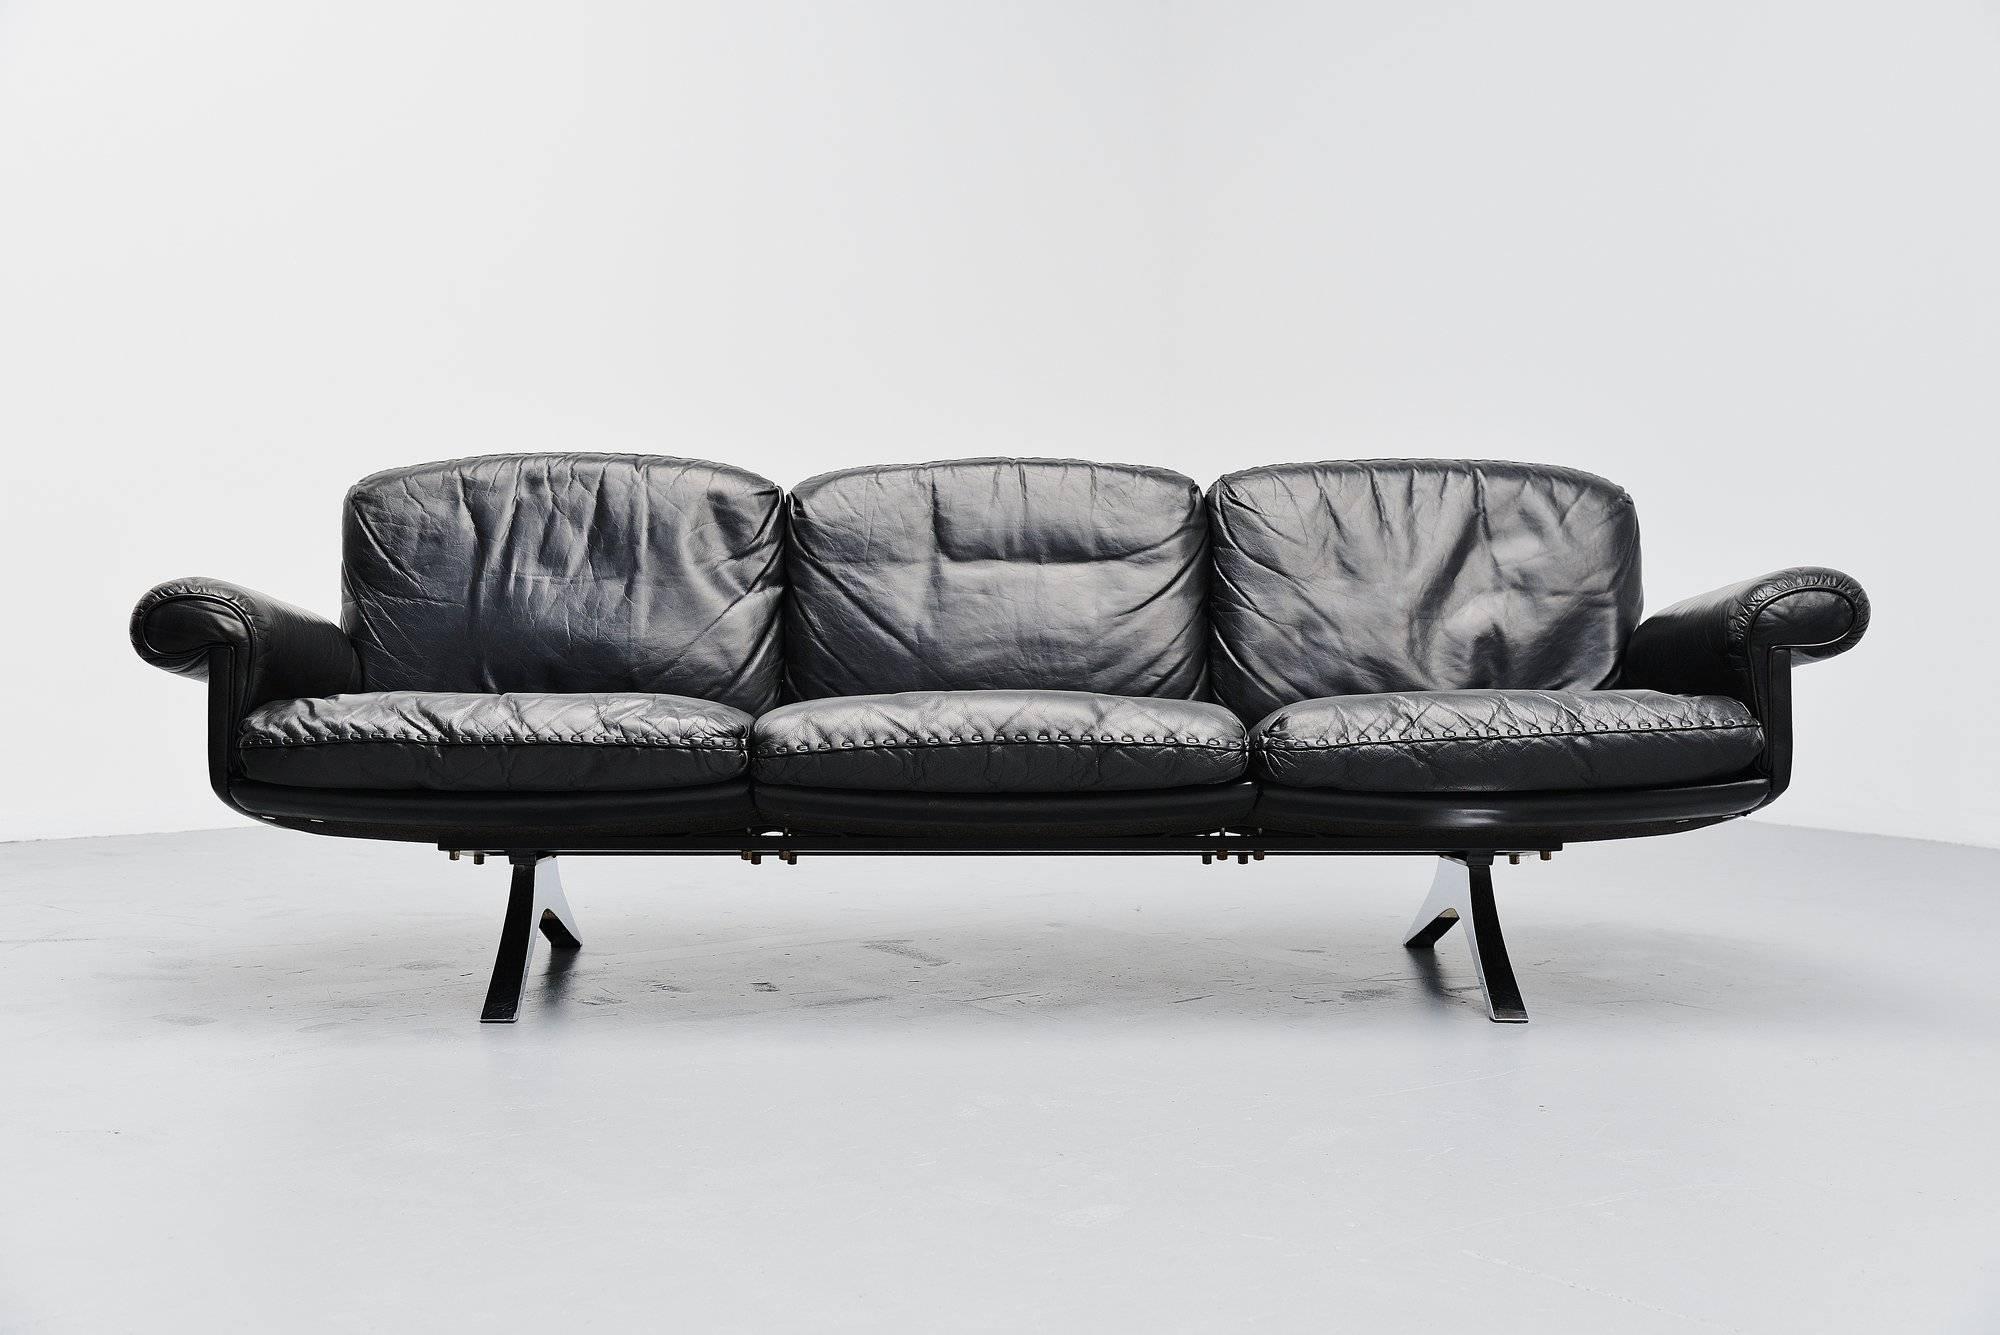 Dynamic lounge sofa designed and manufactured by De Sede, Switzerland 1970. This sofa is model DS31/3 by De Sede and has black leather seat with nicely finished cushions. The legs are made of chrome-plated aluminum. De Sede is know by its quality